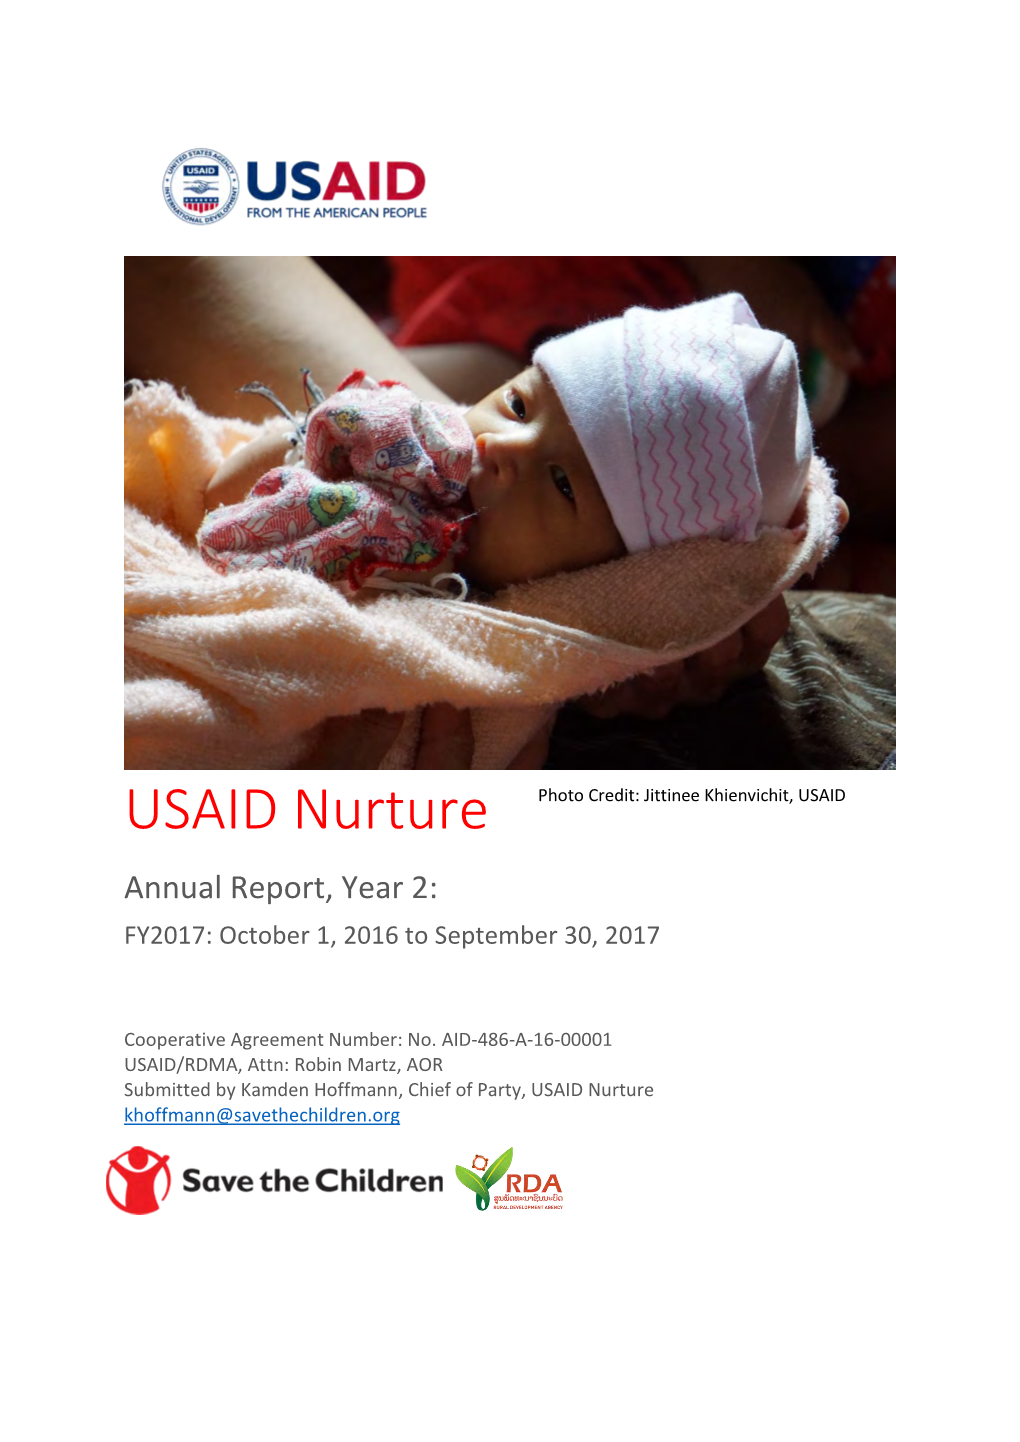 USAID Nurture Photo Credit: Jittinee Khienvichit, USAID Annual Report, Year 2: FY2017: October 1, 2016 to September 30, 2017